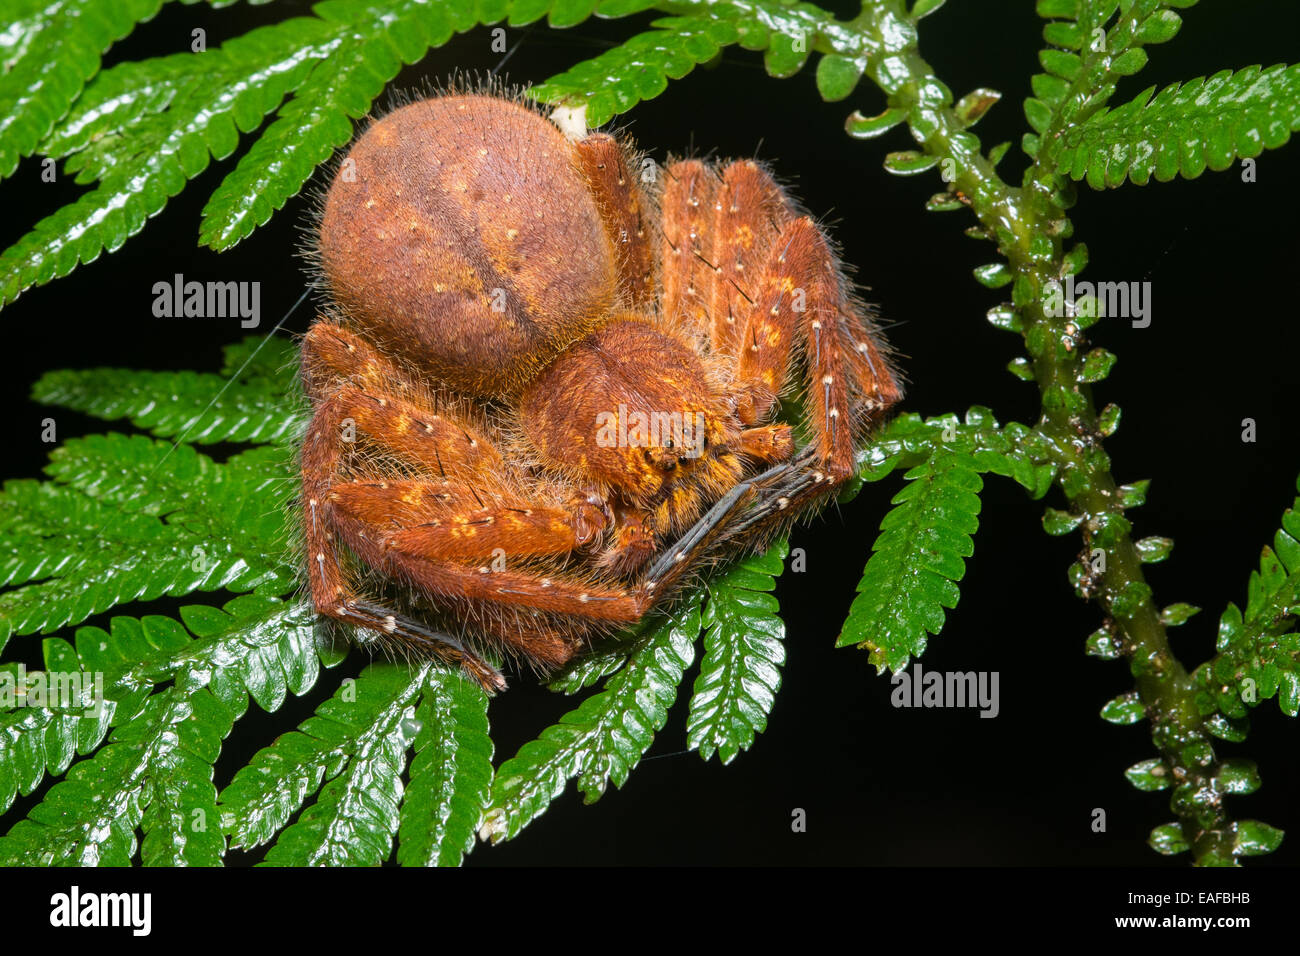 A spider bides its time on a leaf in the jungle in Borneo. Stock Photo